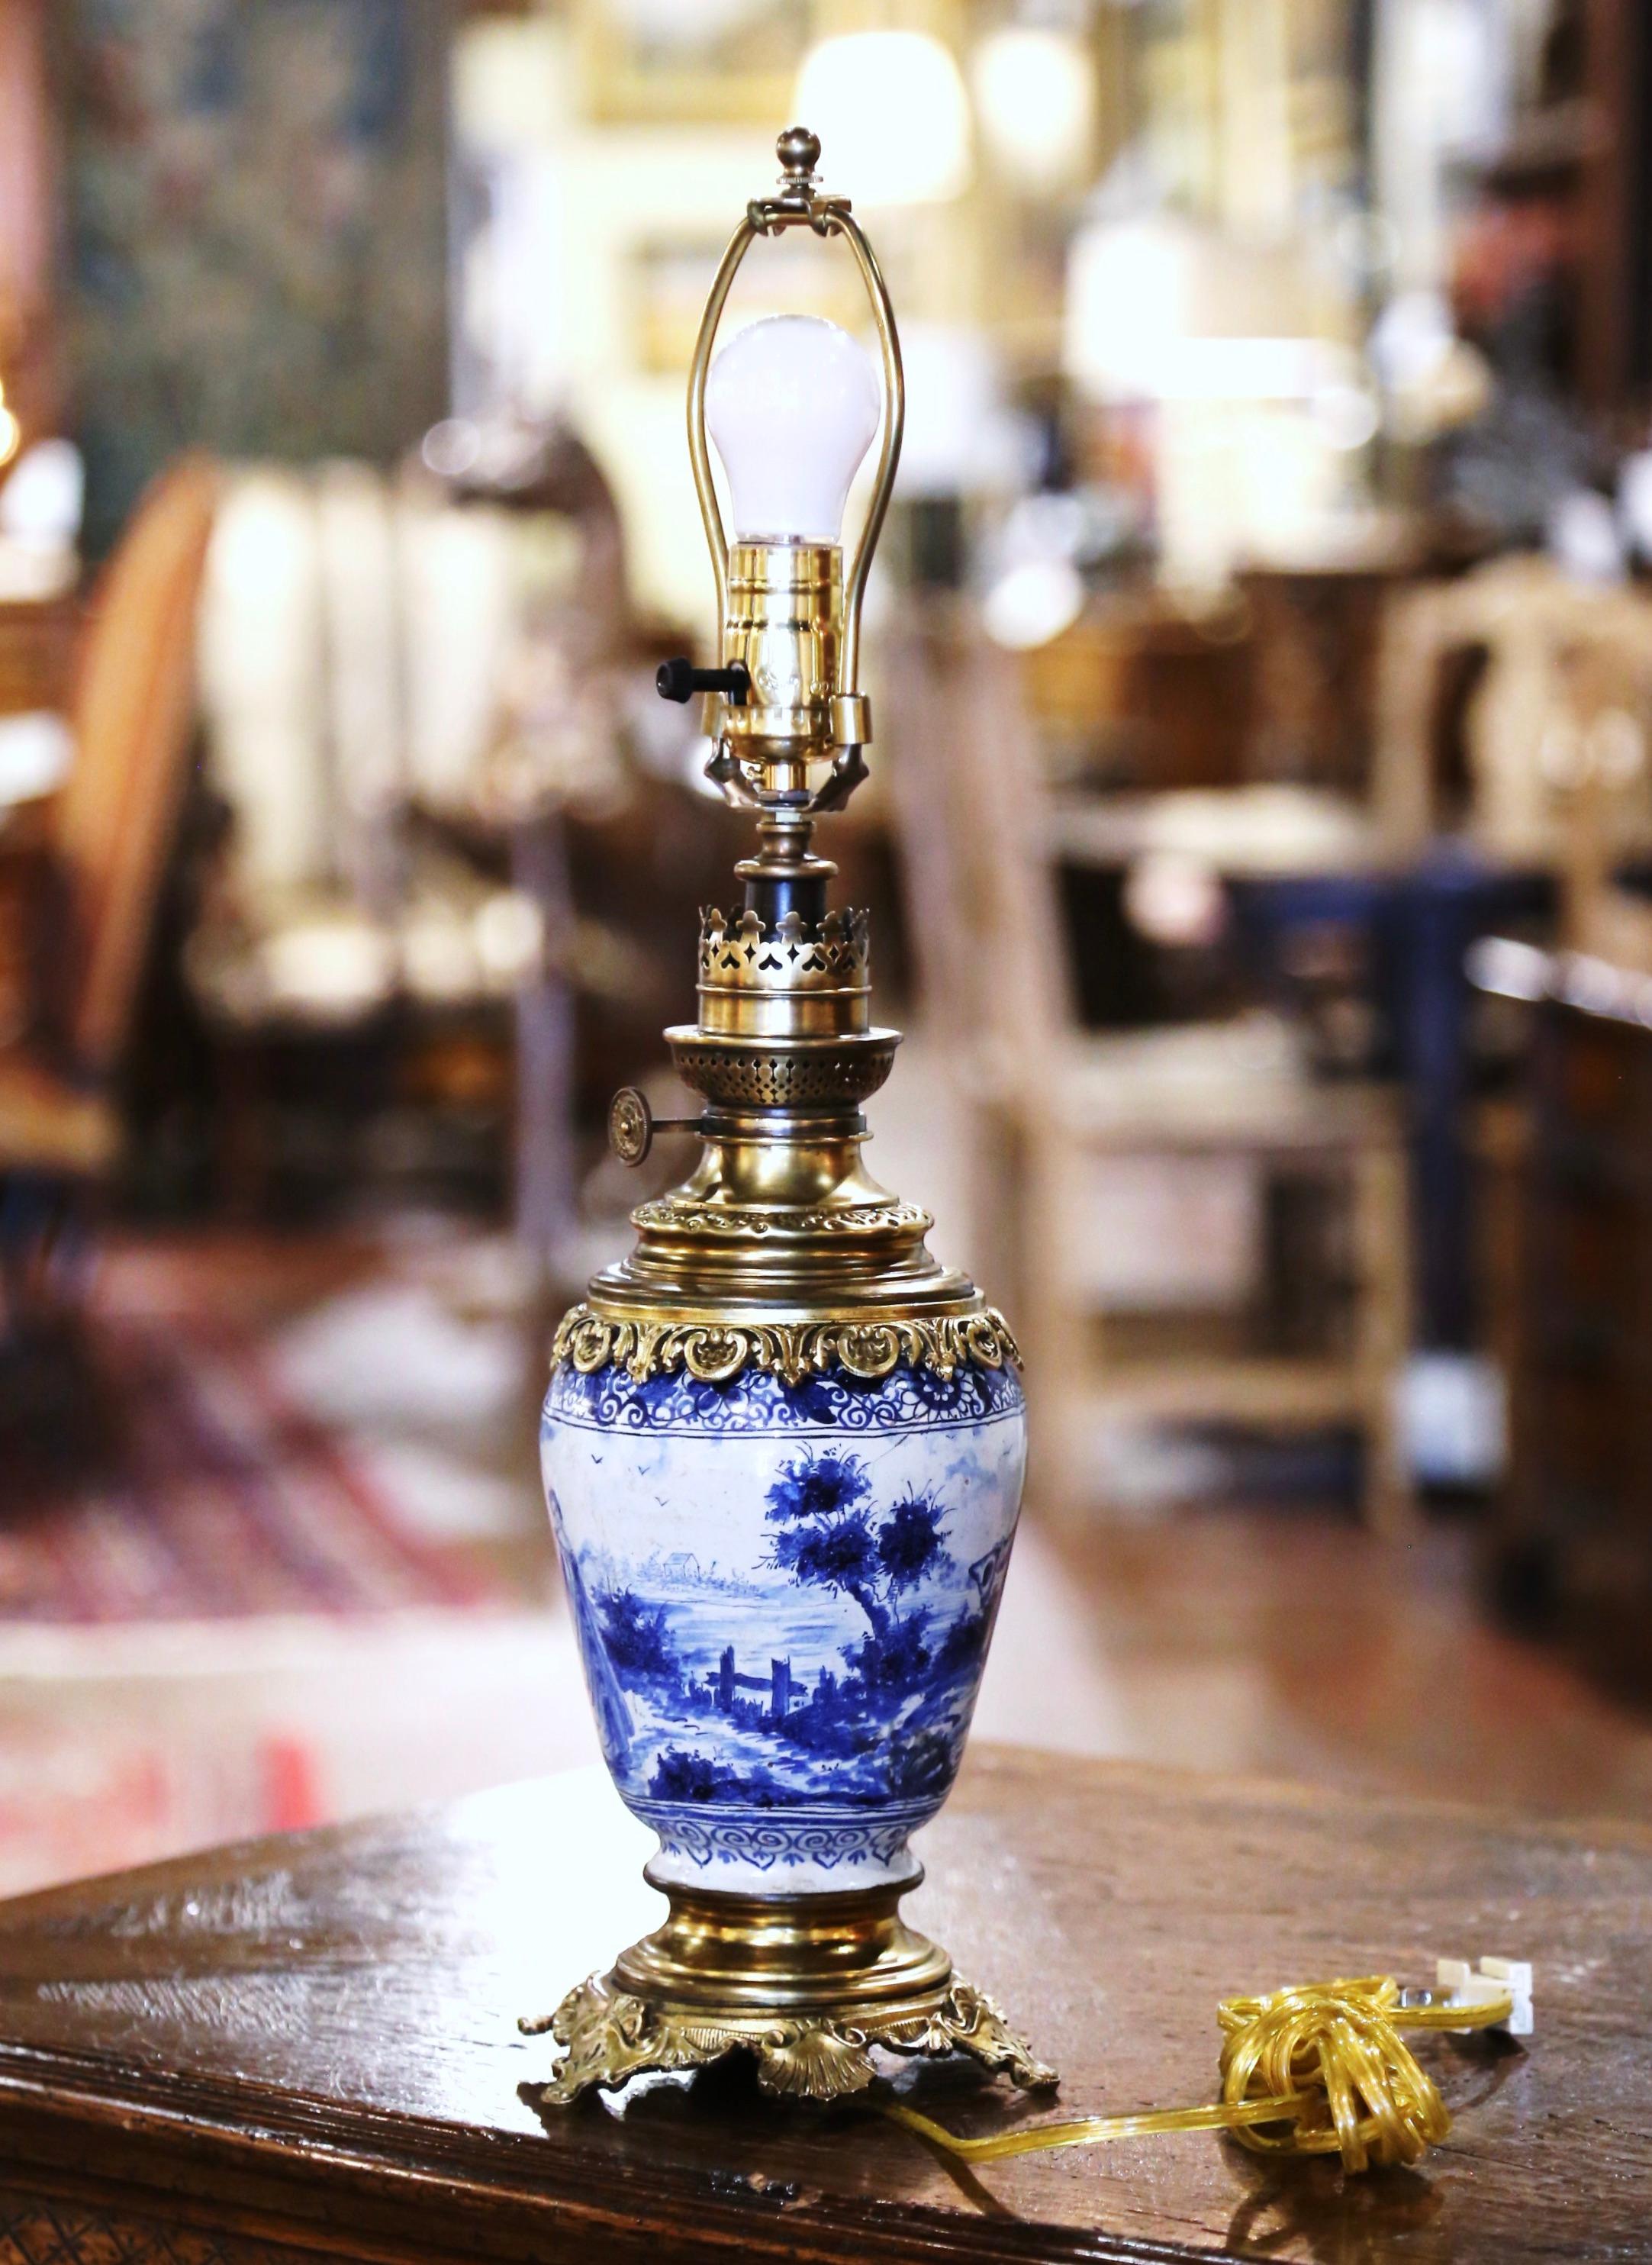 This elegant antique oil lamp was crafted in France, circa 1880. The porcelain 